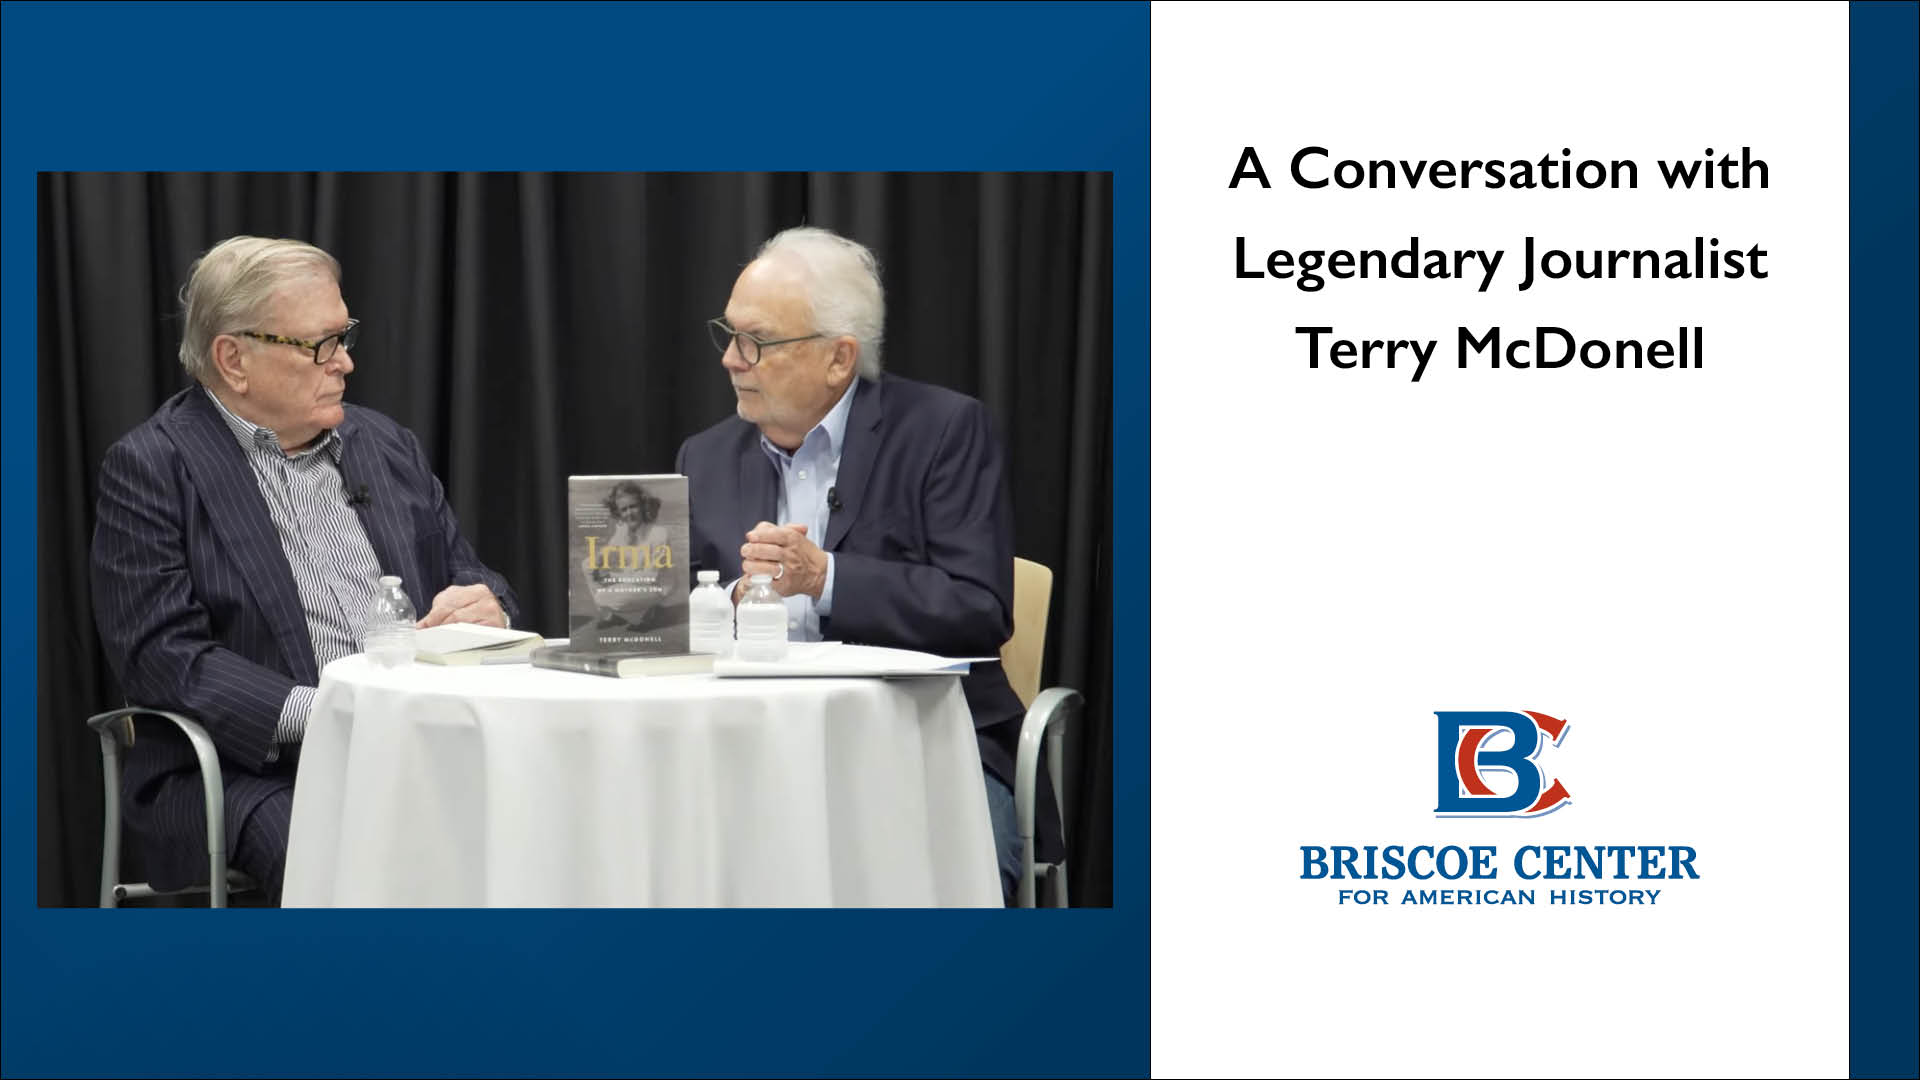 A Conversation with Legendary Journalist Terry McDonell